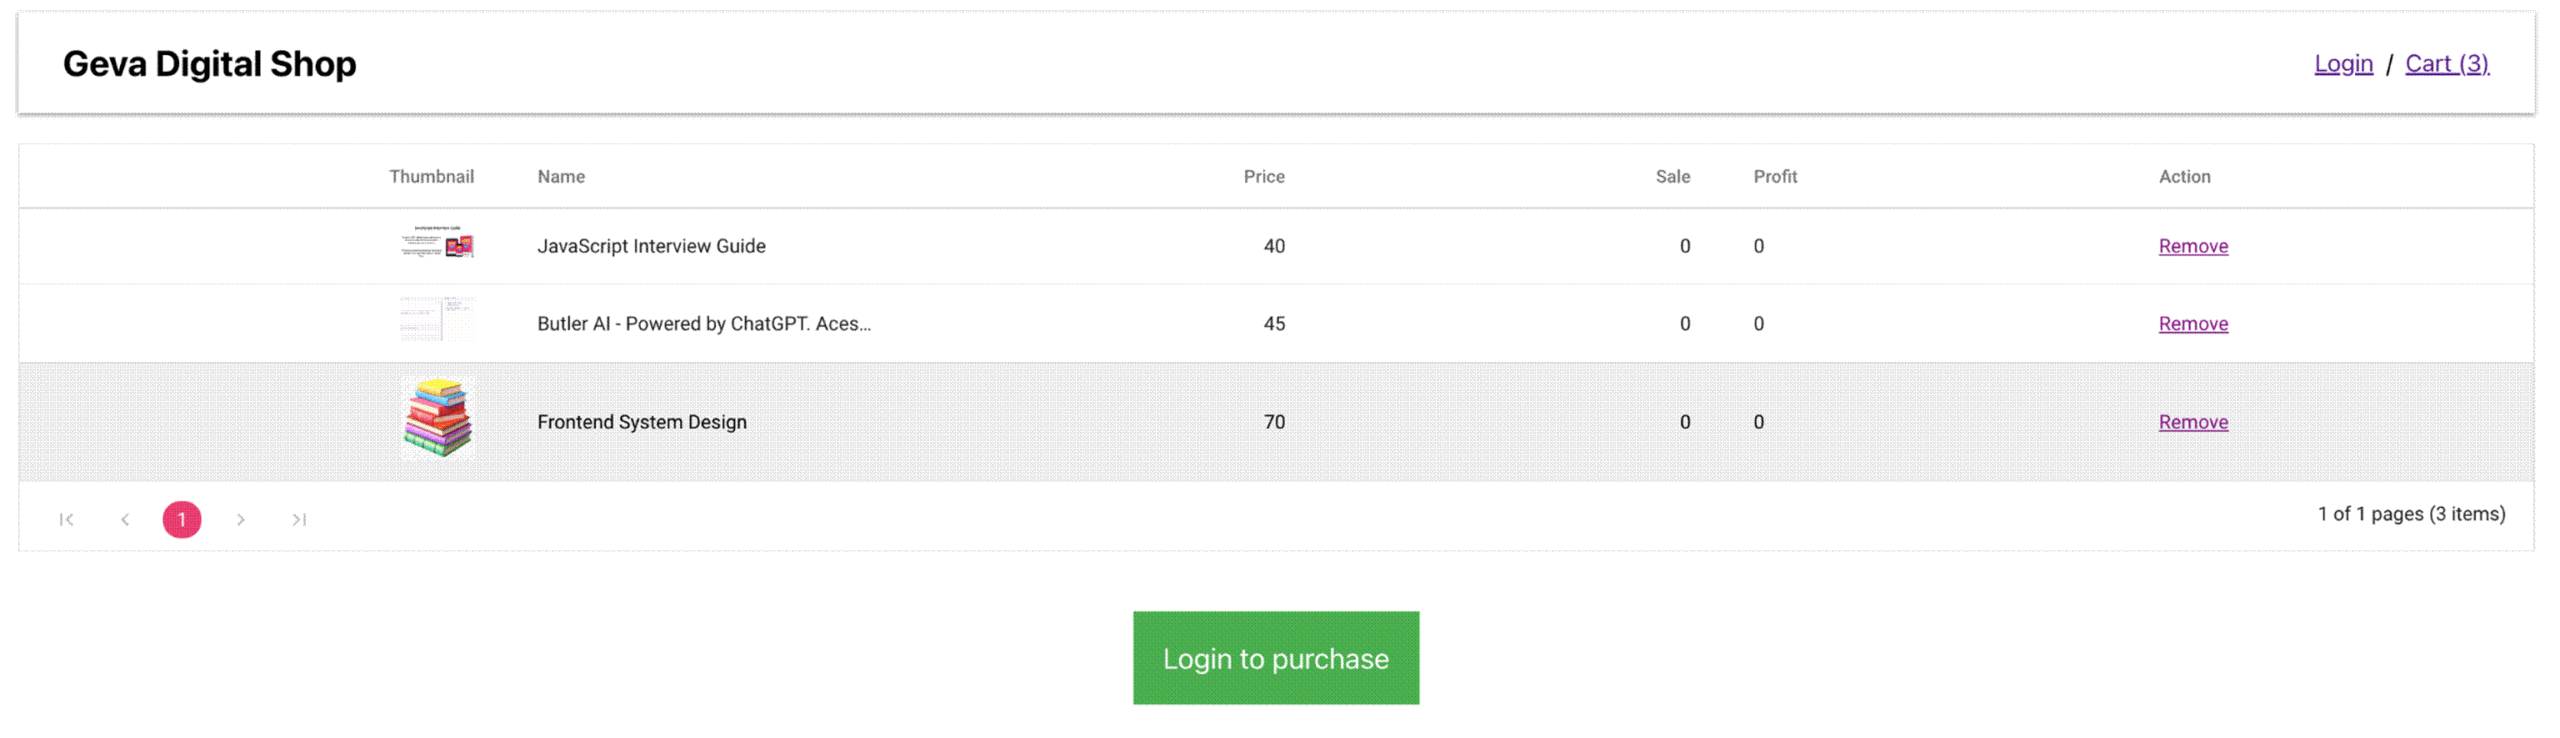 Cart-before-login page in the React e-commerce app